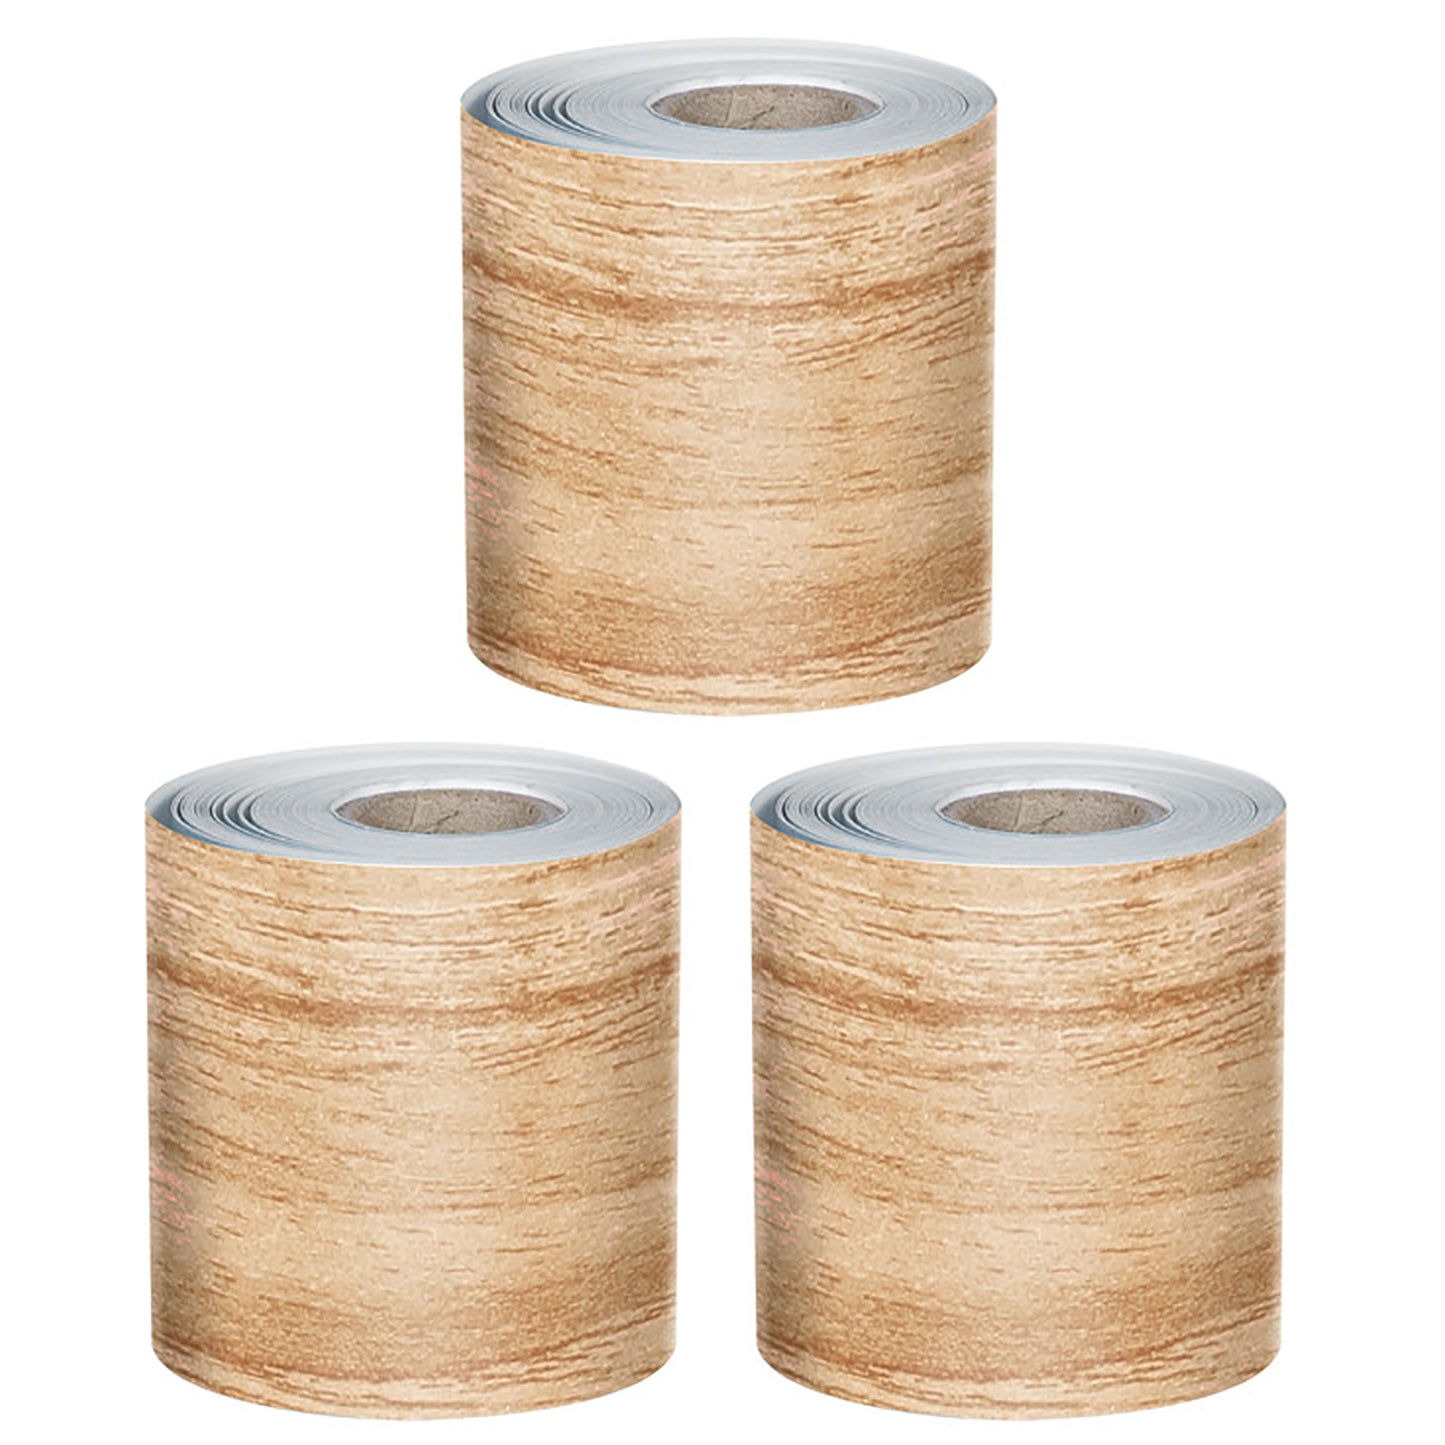 Grow Together Light Wood Grain Rolled Straight Bulletin Board Borders, 65 Feet Per Roll, Pack of 3